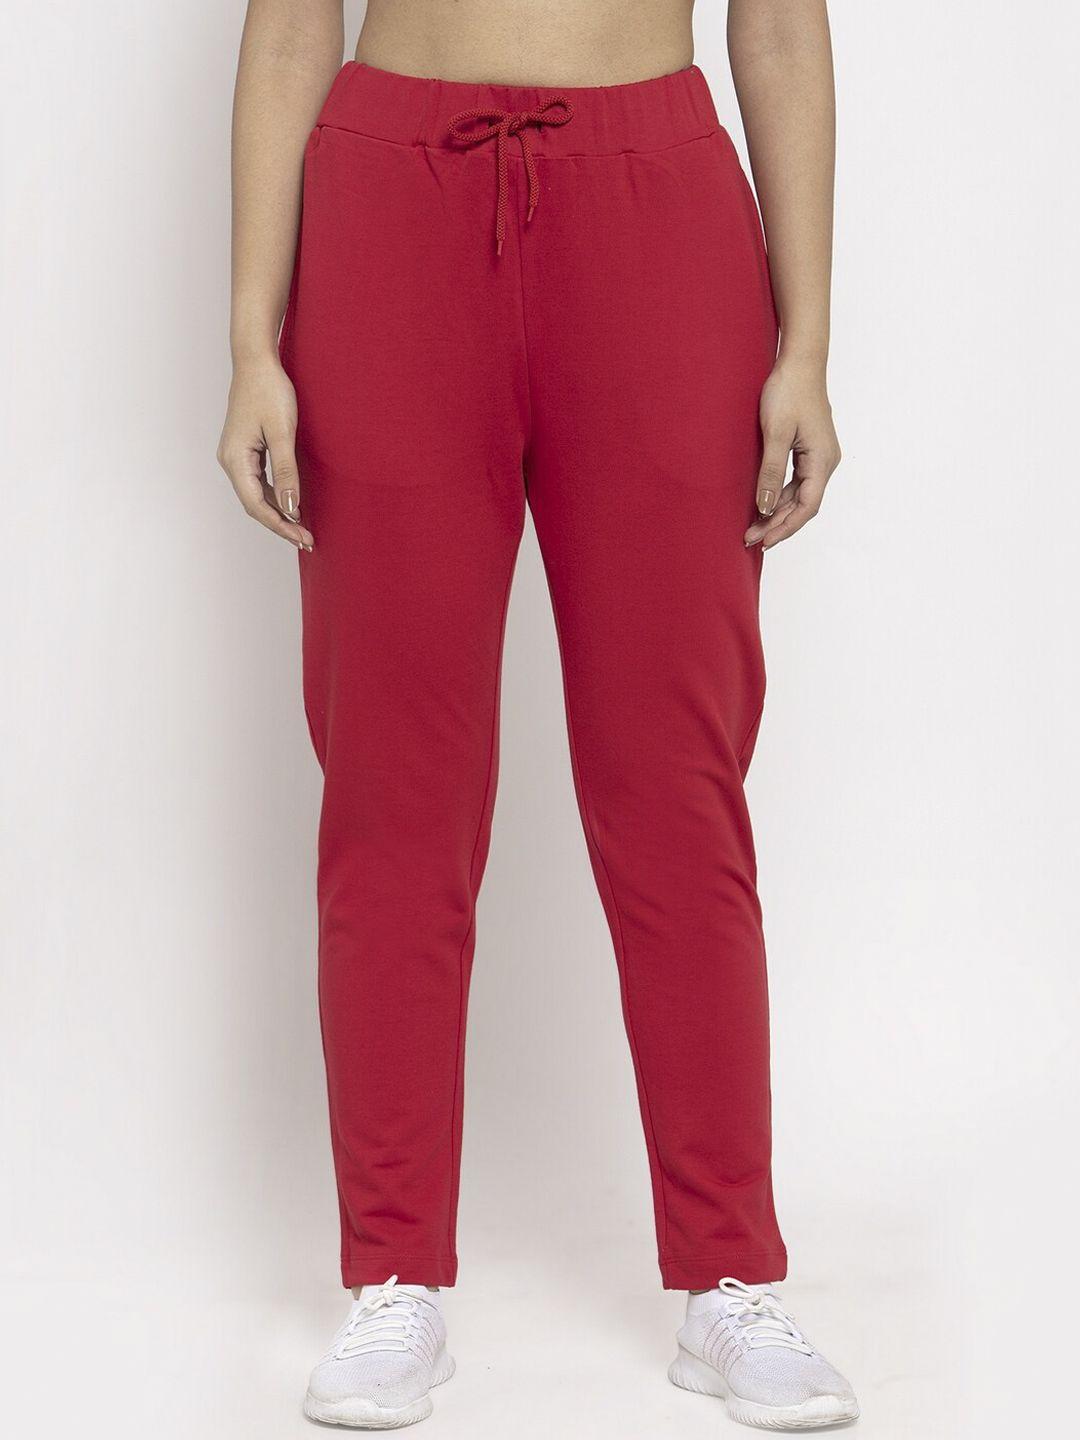 door74 women red solid relaxed-fit track pants